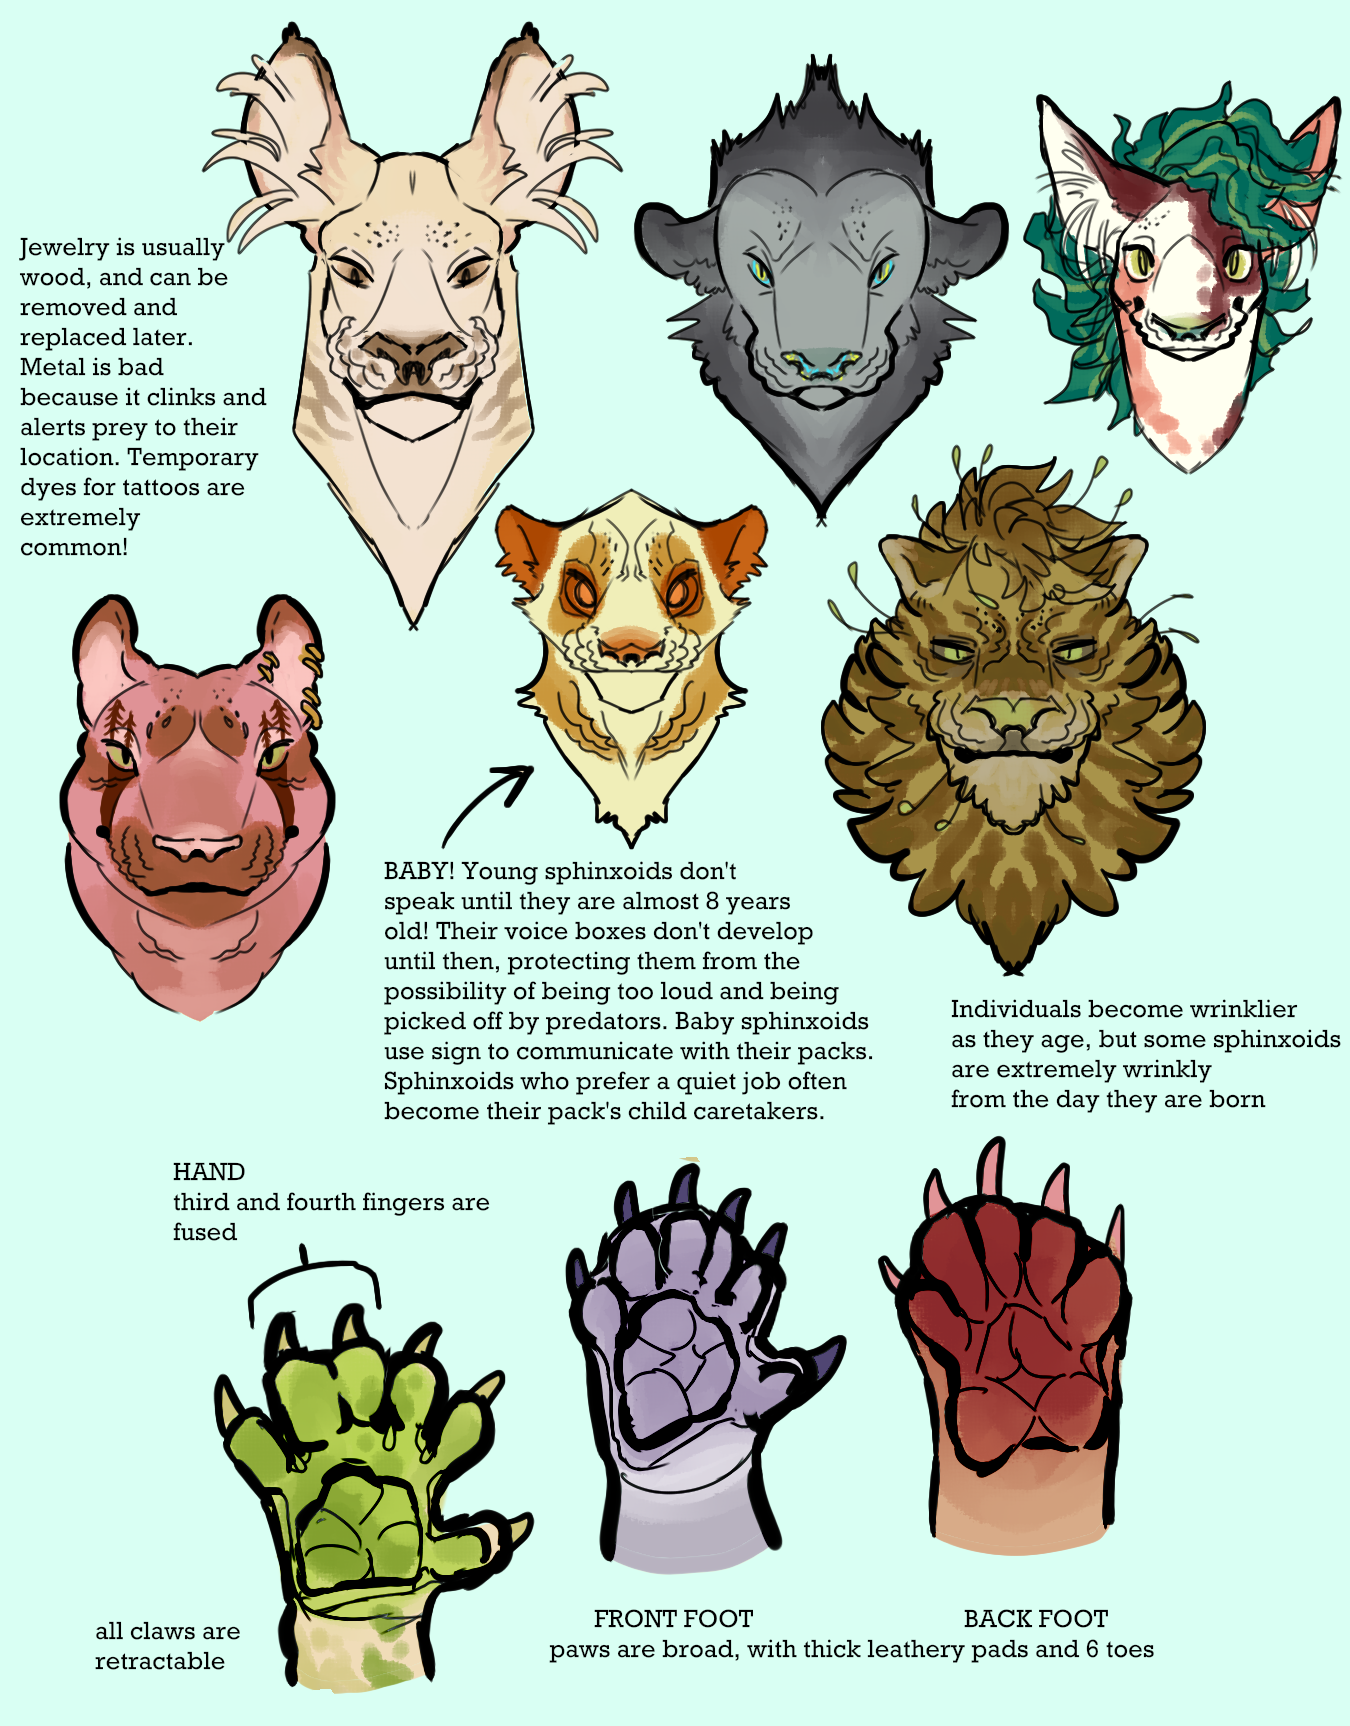 A collection of various Sphinxoid faces, which look like a blend between those of various types of cats and humans. Their jewelry is usually wood and can be removed or replaced later. Metal is bad because it clinks and alerts prey to their location. Temporary dyes for tattoos are extremely common! Young Sphinxoids don't speak until they are 8 years old! Their voice boxes don't develop until then, protecting them from the possibility of being too loud and getting picked off by predators. Baby Sphinxoids use sign to communicate with their packs. Sphinxoids who prefer a quiet job often become their pack's child caretakers. Individuals become wrinklier as they age, but some Sphinxoids are extremely wrinkly from the day they are born. The third and fourth fingers on their hands are fused, and they have six fingers on each hand, and five toes on each foot, but polydactyly is also possible. Their paws are broad, with thick leathery pads.